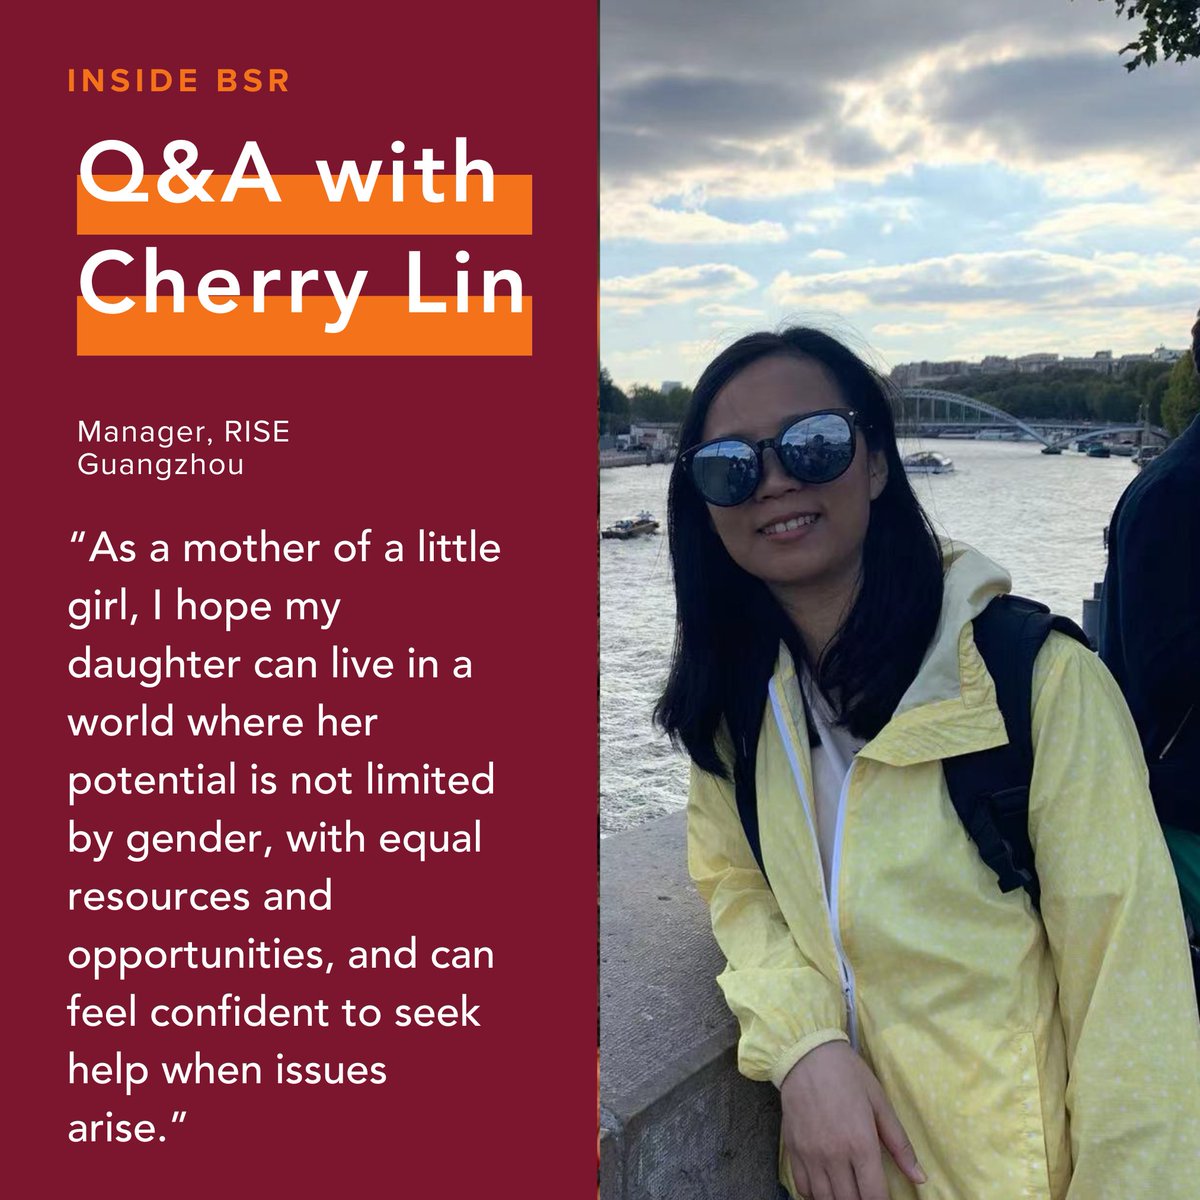 Inside BSR is our series featuring BSR team members from around the world. Meet Cherry Lin, a Manager based out of our Guangzhao office who works on supporting gender equality in global supply chains. bsr.org/en/blog/inside…